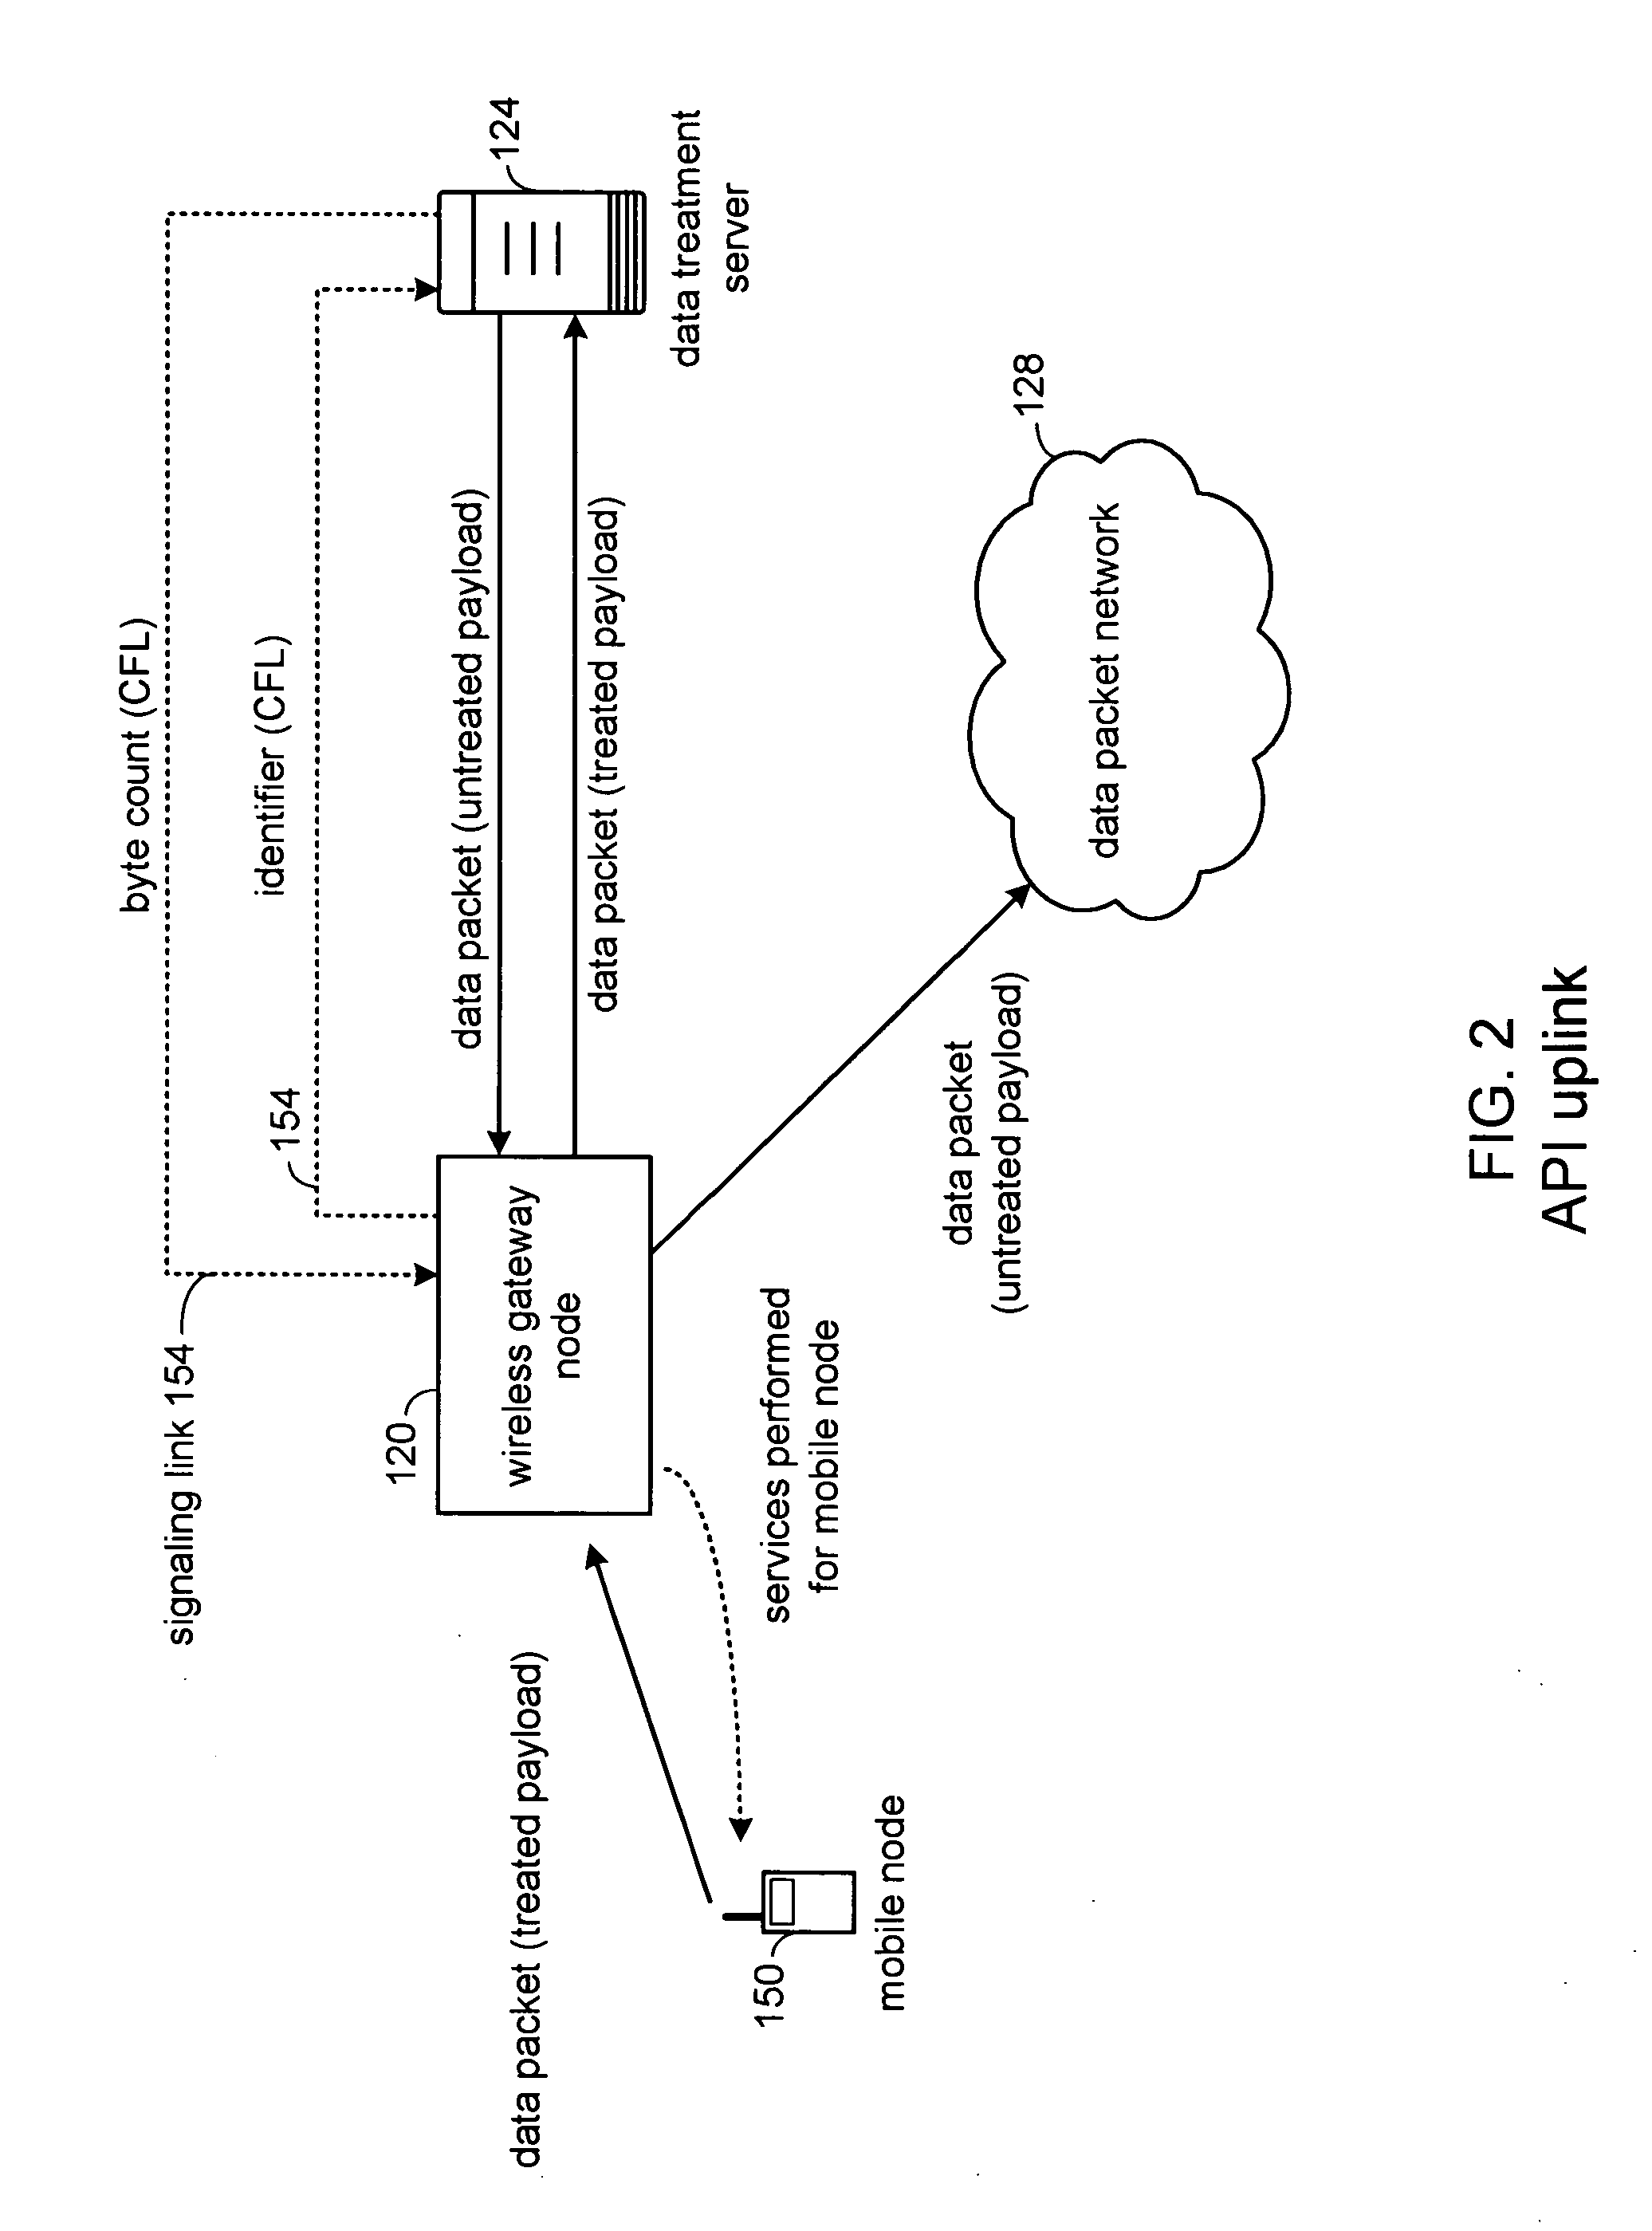 Method for performing network services